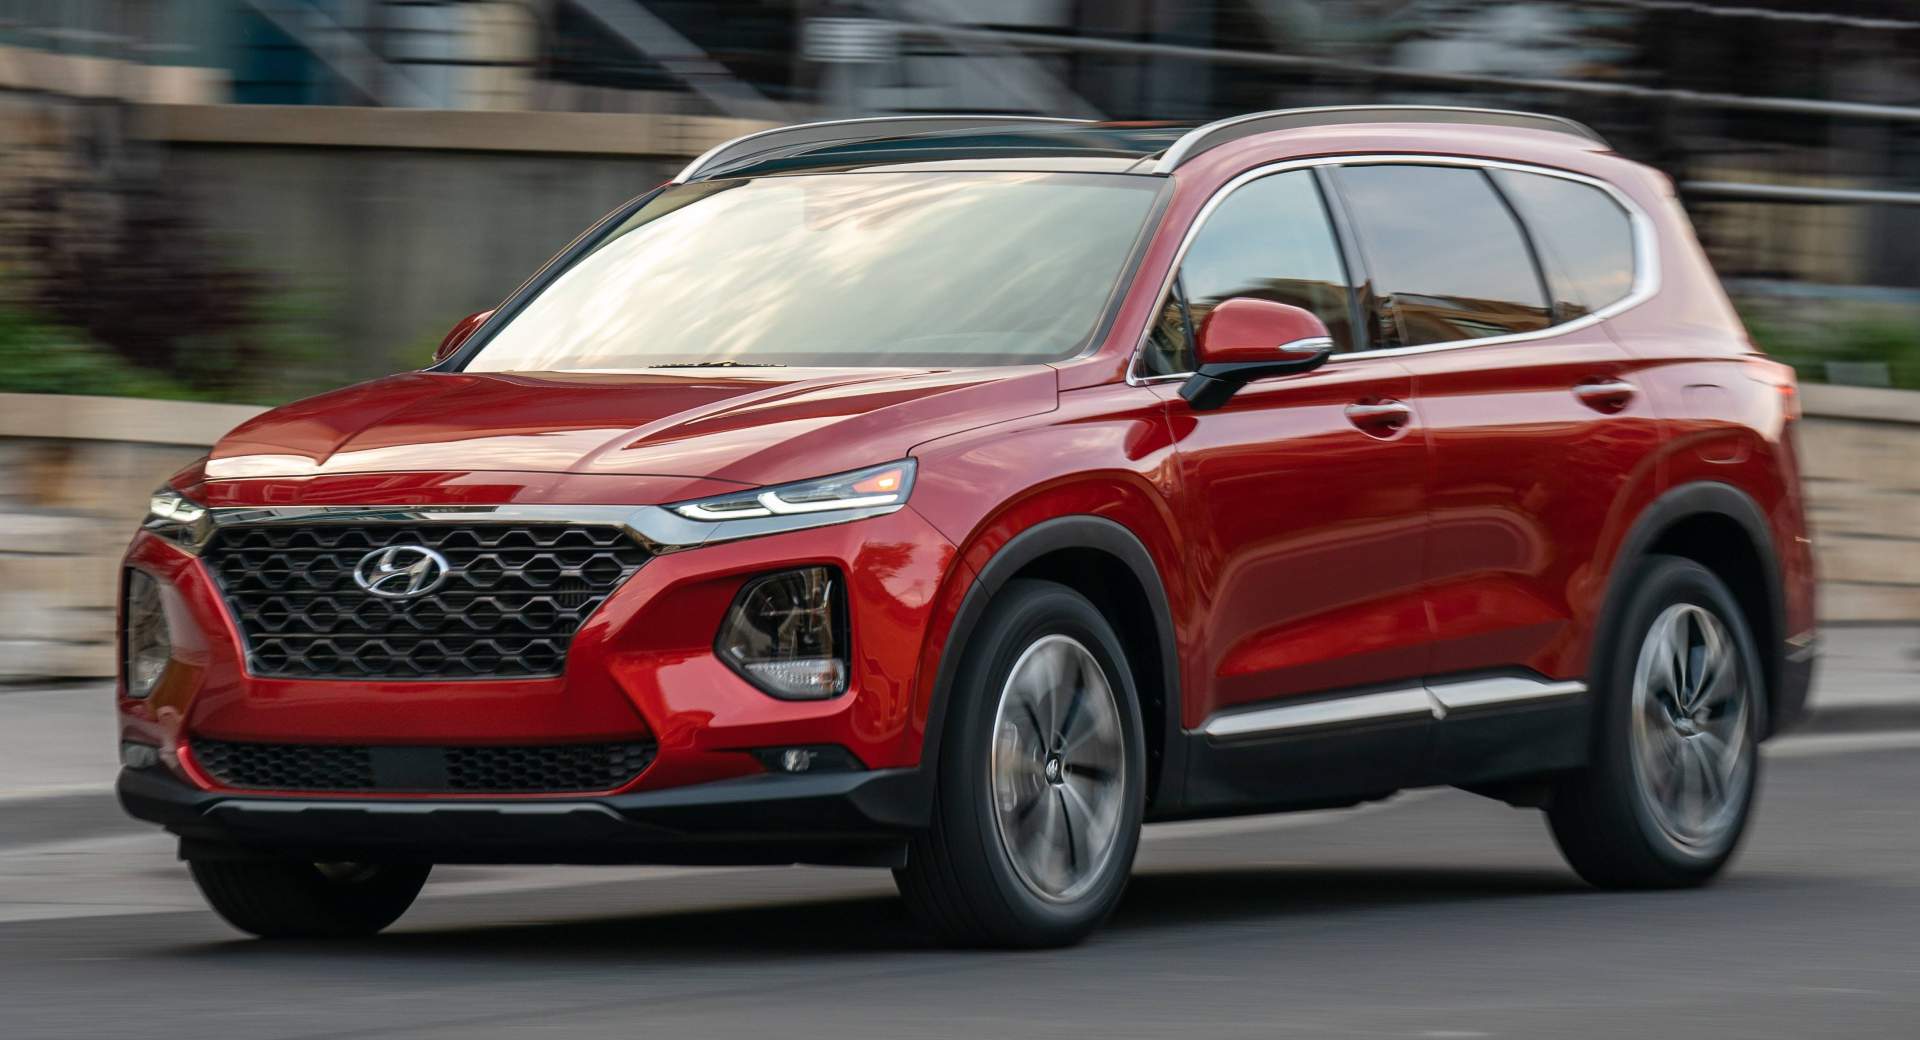 2020 Hyundai Santa Fe Diesel And Seven-Seat Models Cancelled From U.S ...